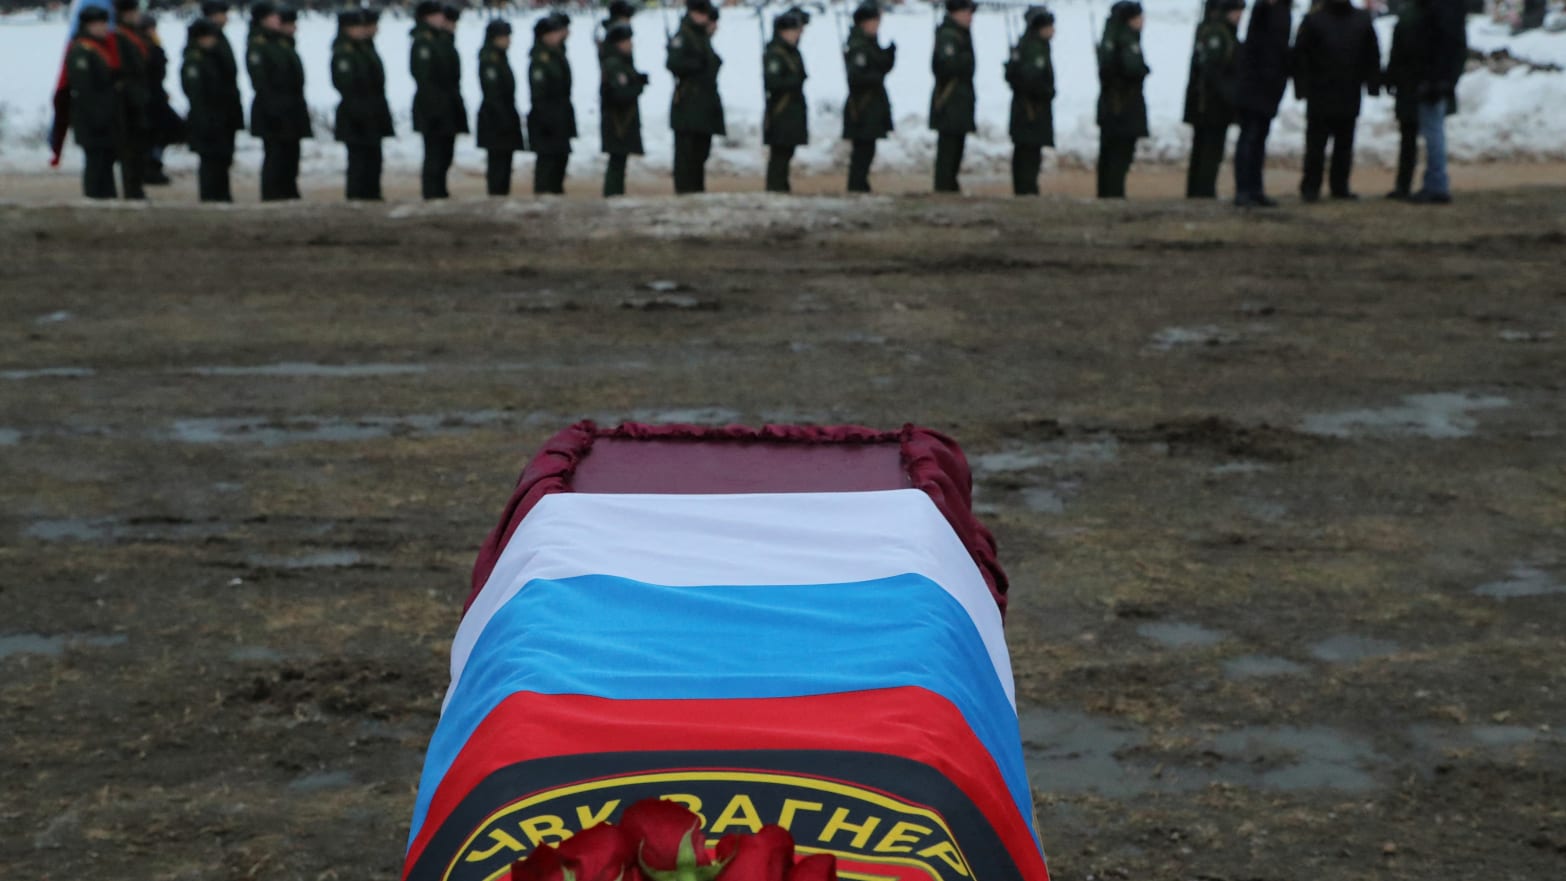 The coffin of Wagner mercenary Dmitry Menshikov, killed during the war in Ukraine, is covered with flags during his funeral in the Alley of Heroes at a cemetery in St. Petersburg, Russia, Dec. 24, 2022.